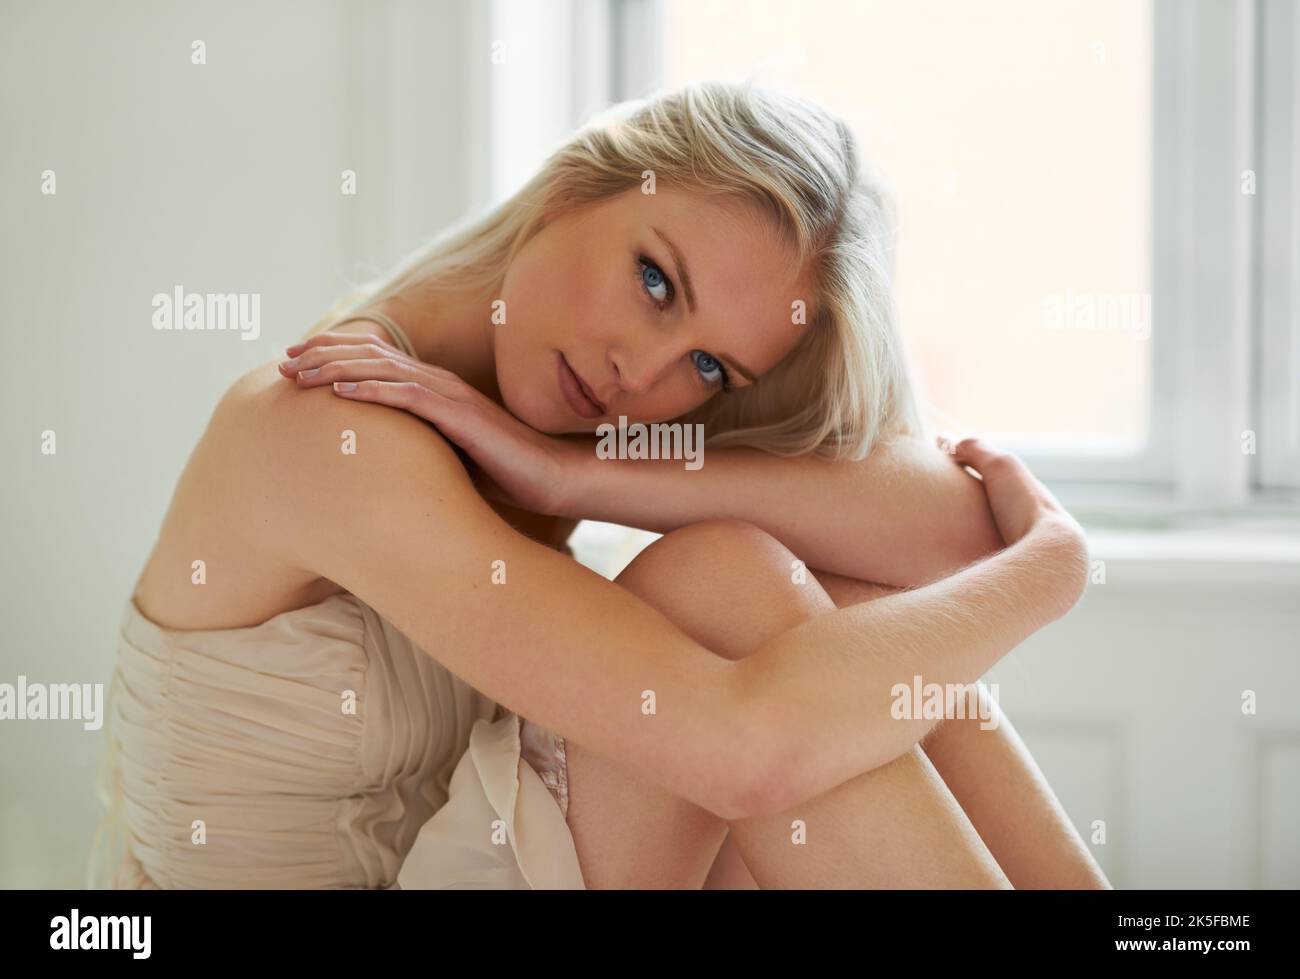 Embracing the morning. Portrait of an attractive woman sitting in her bedroom. Stock Photo